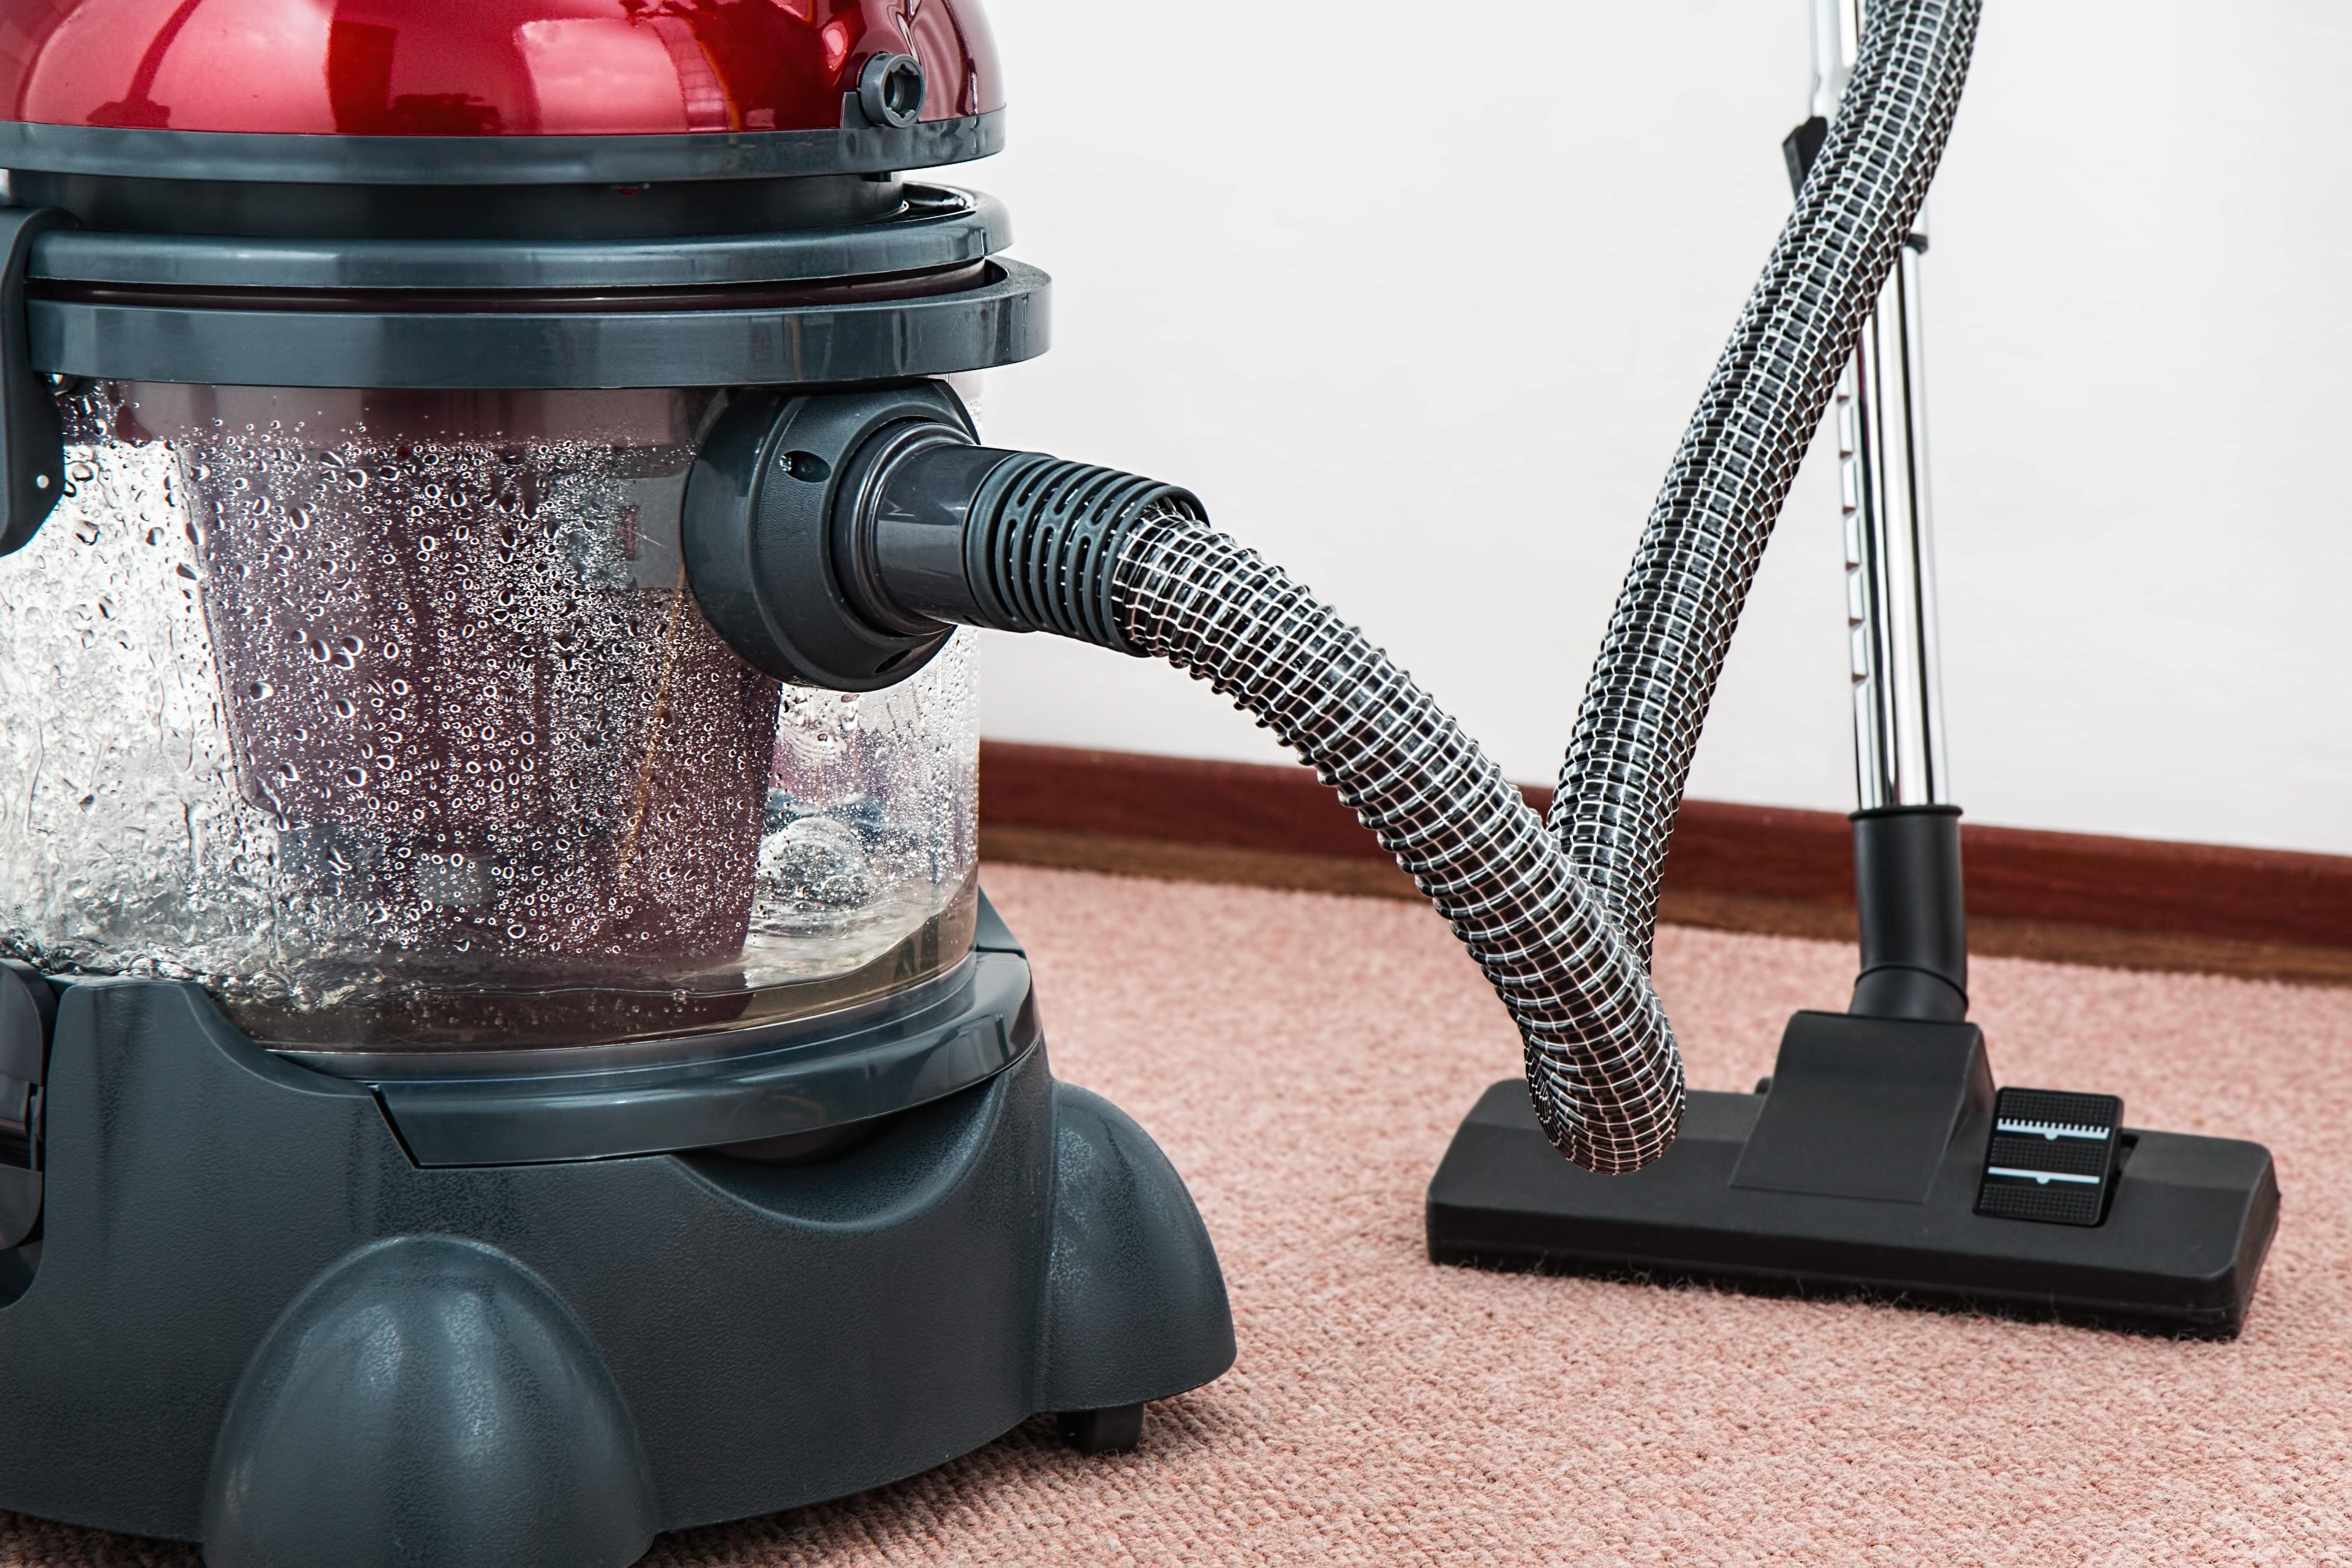 How To Attach Shop Vac To Sander 